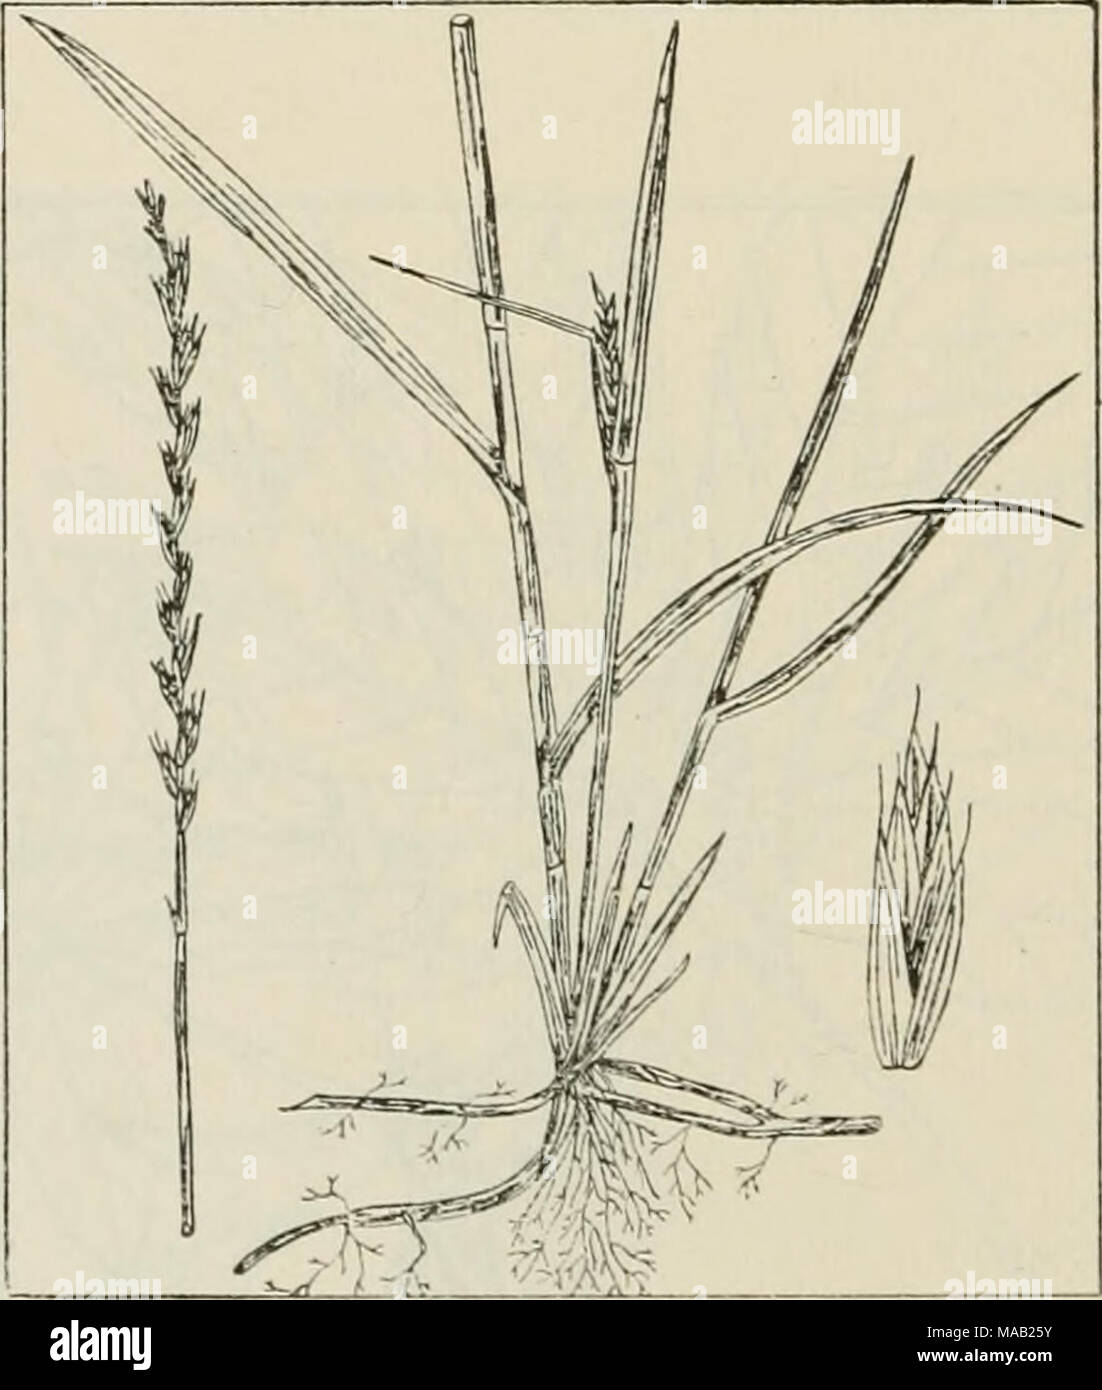 . The drug plants of Illinois . AGROPYRON REPENS (L.) Beauv. Dog grass, quack grass, wheat grass, couch grass, triticum. Gramineae.— An herbaceous grass 1 to 4 feet tall, per- ennial ; rootstocks long, creeping, bright greenish-j^ellow; roots fibrous; leaves bright green or glaucous, flat or inrolled, narrow, rough on the upper surface; spike- lets 3 to 8 flowered, set in two rows on opposite sides of the stem to form a termi- nal spike 3 to 8 inches long; glumes sharp- tipped or awned, strongly nerved. The rootstocks (not the roots) collected in the spring. Introduced and established along ra Stock Photo